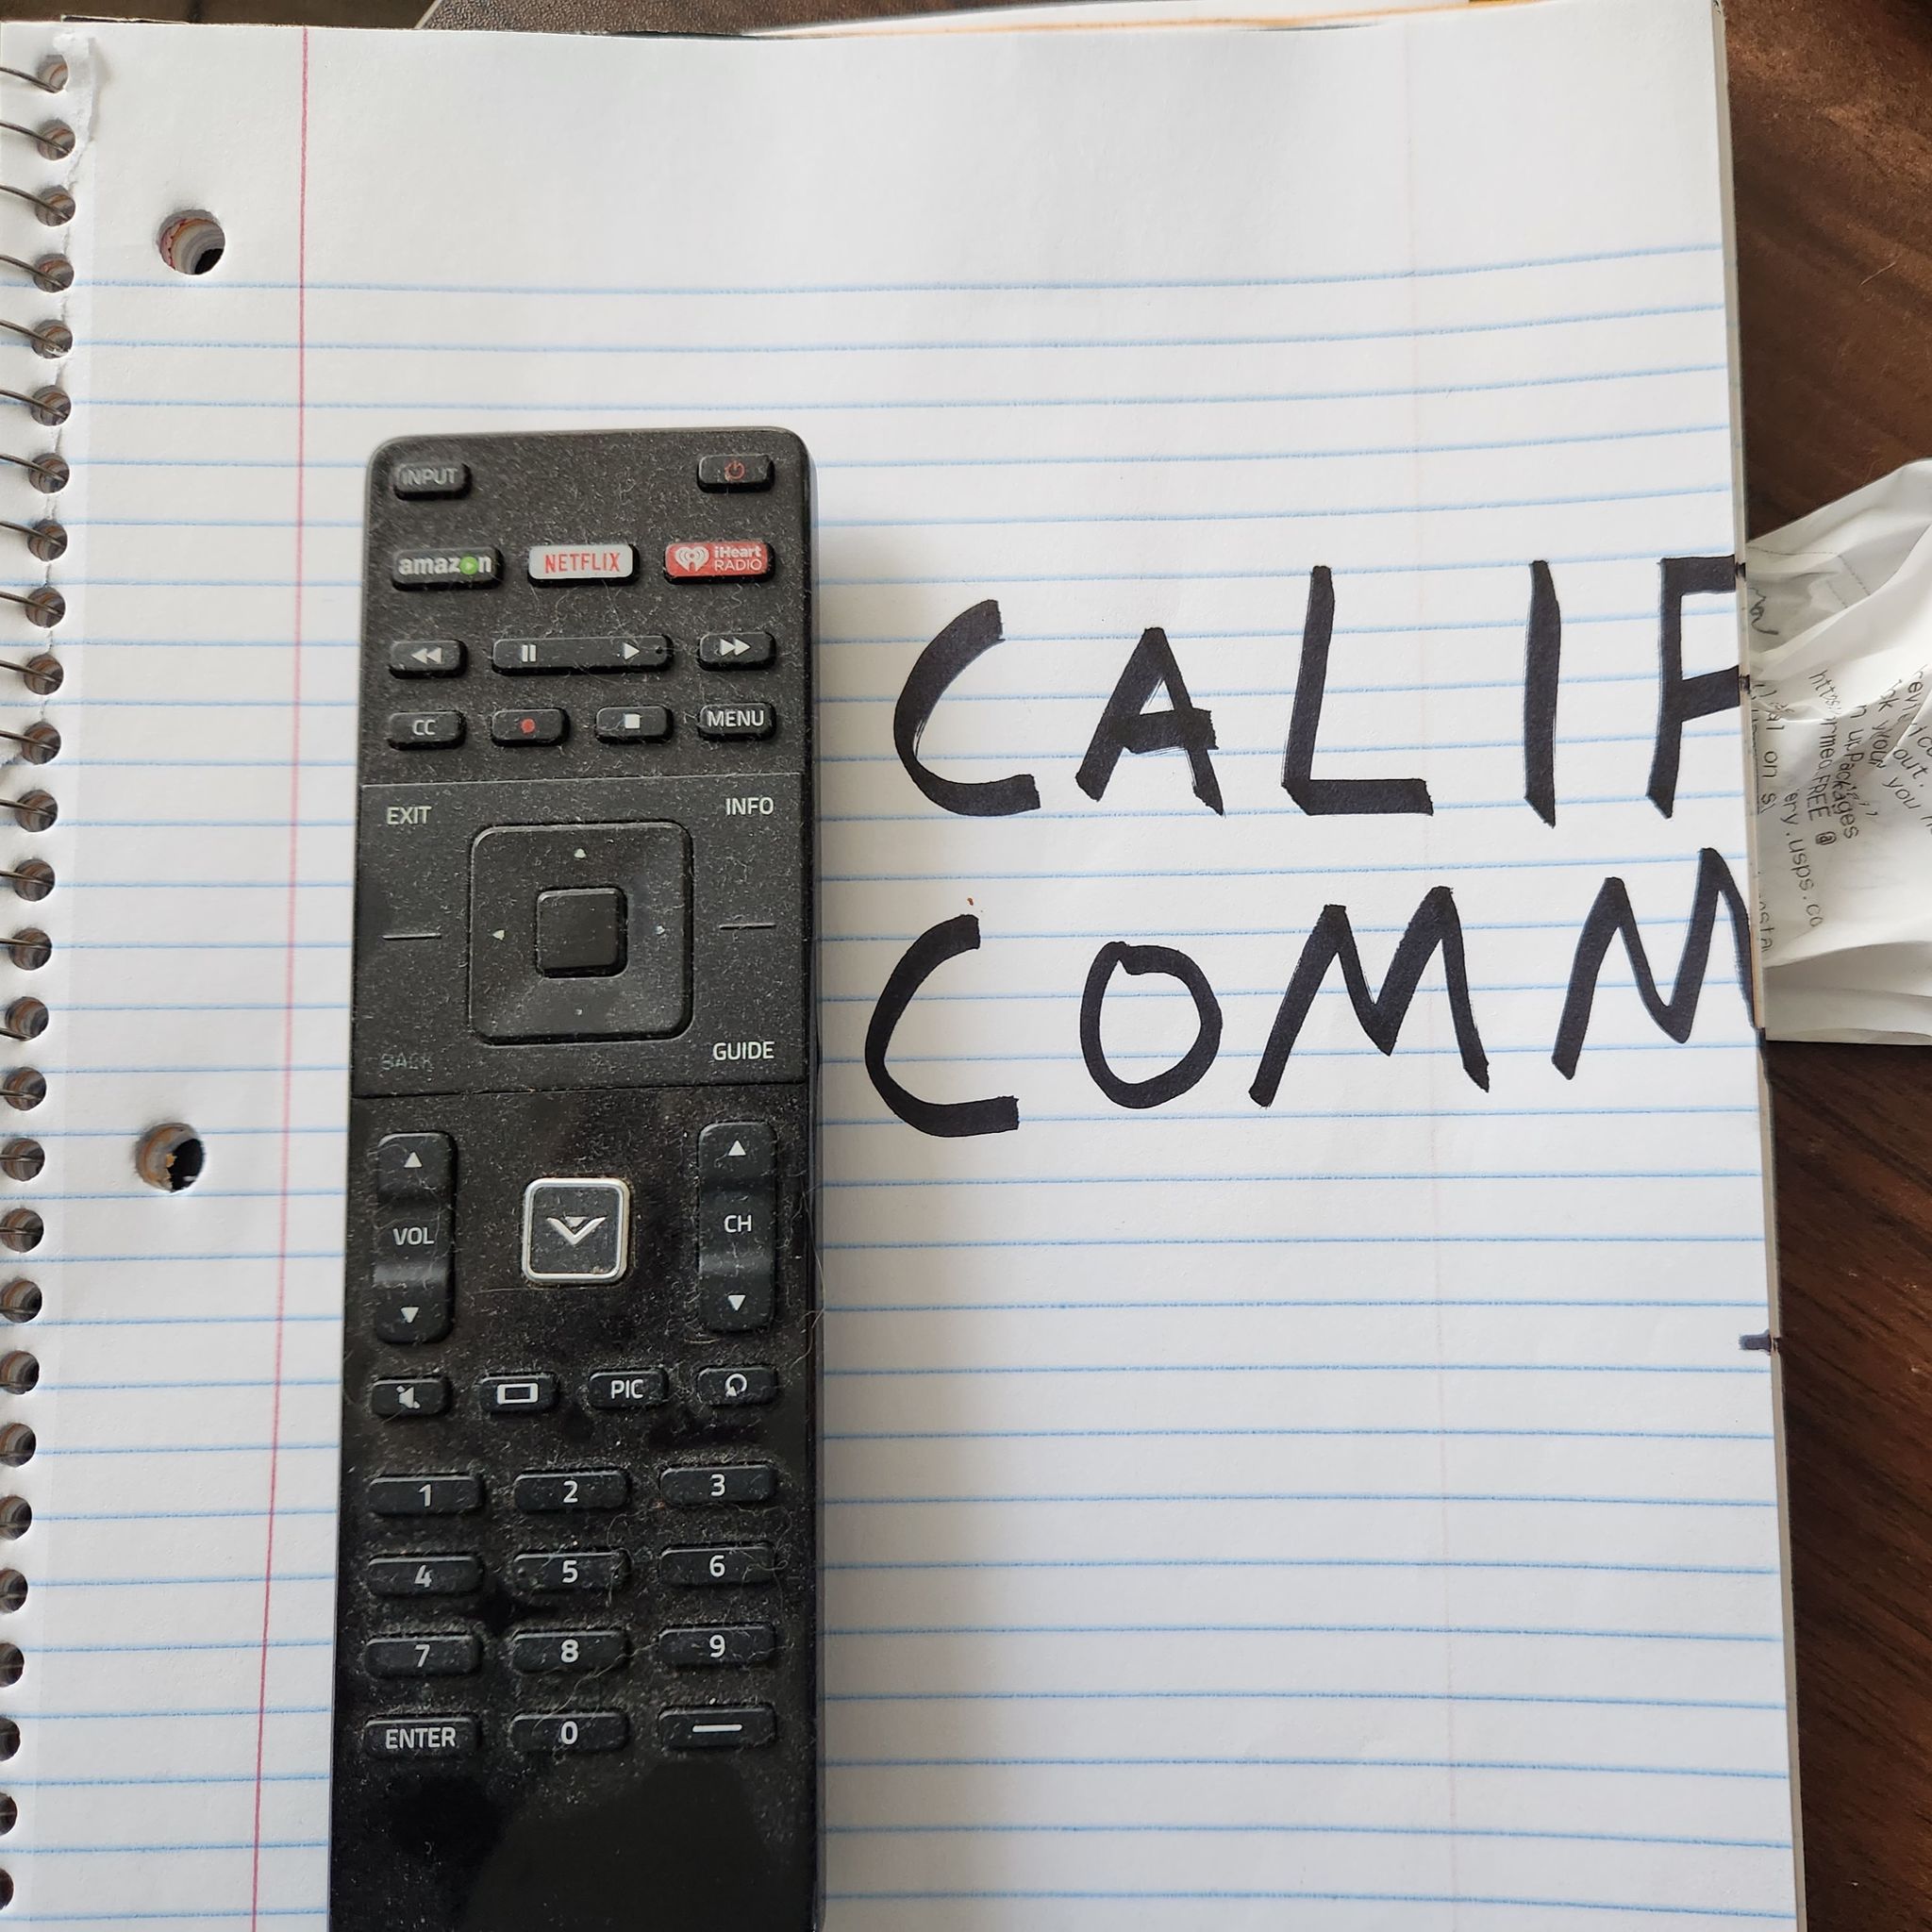 lemon pitch california commando single artwork - photo of a remote control on a pad of lined paper